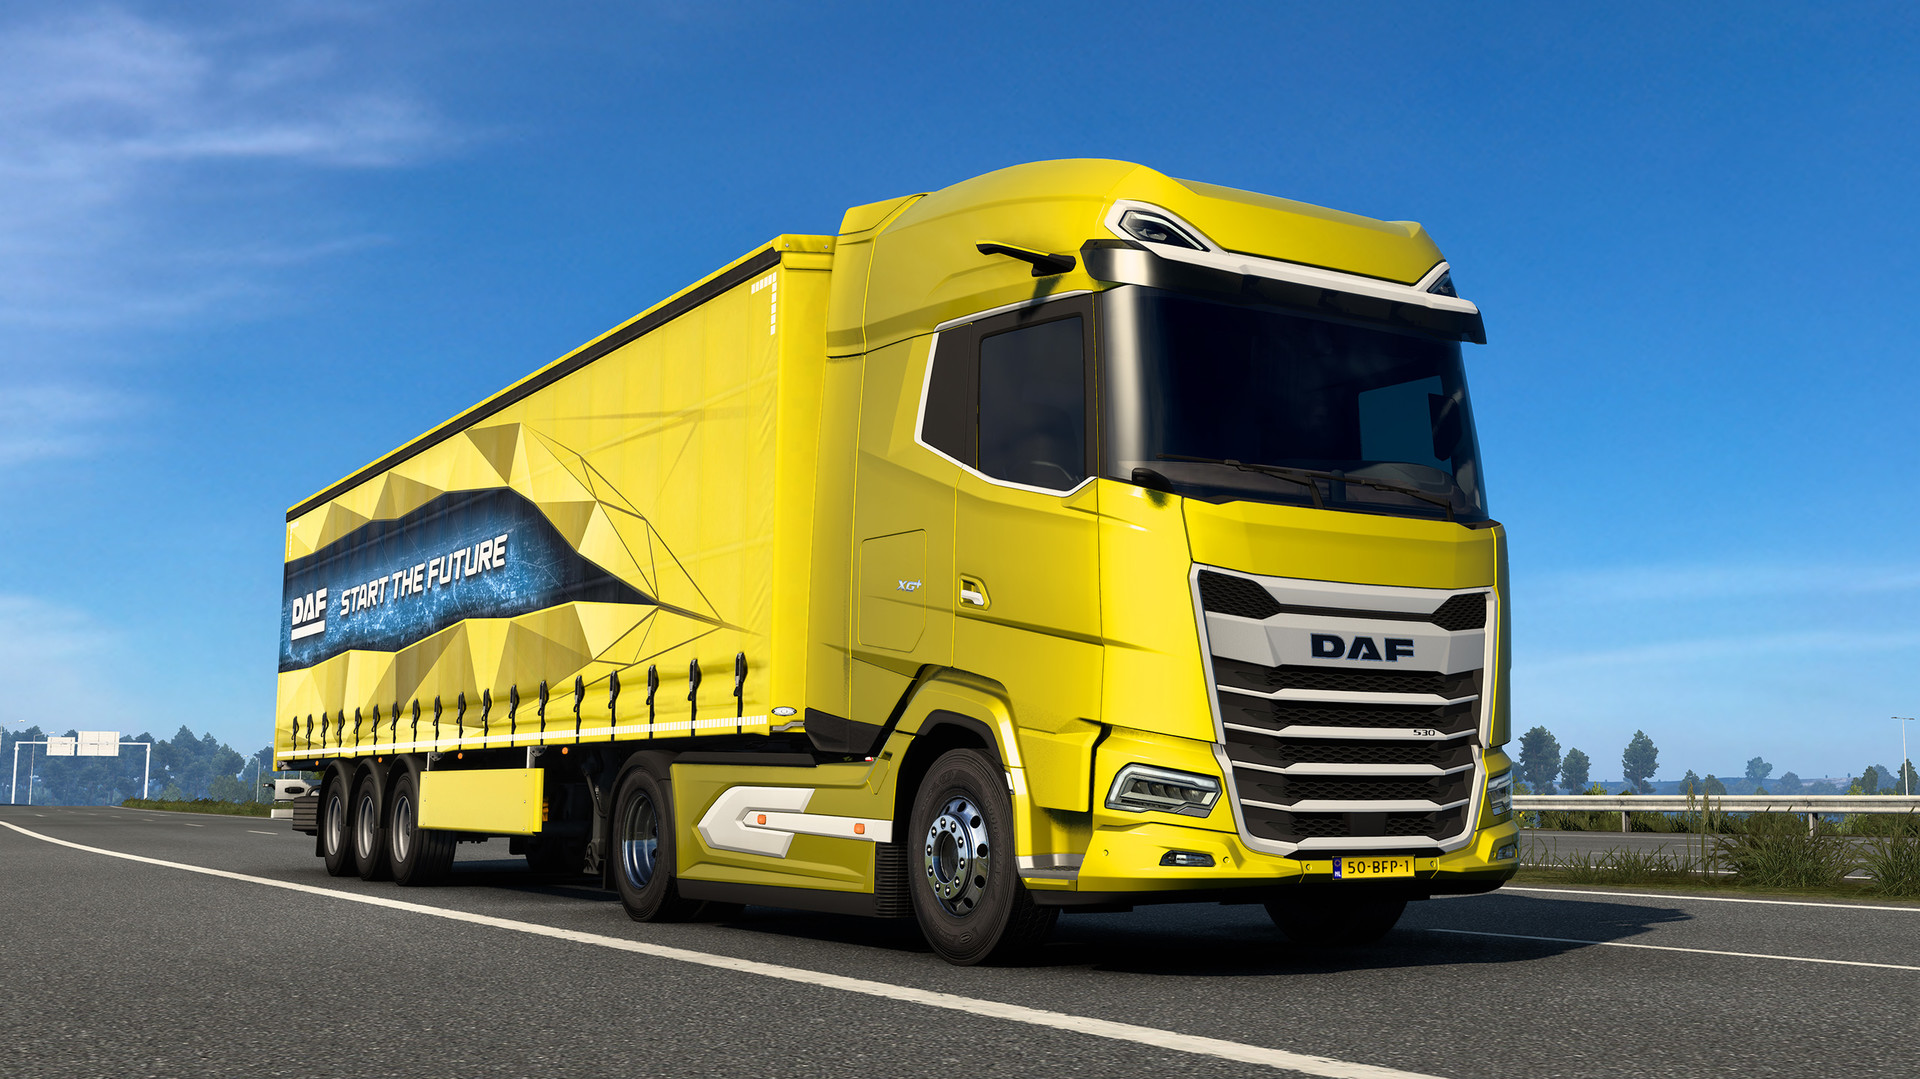 DAF's new lorries now available in Euro Truck Simulator 2